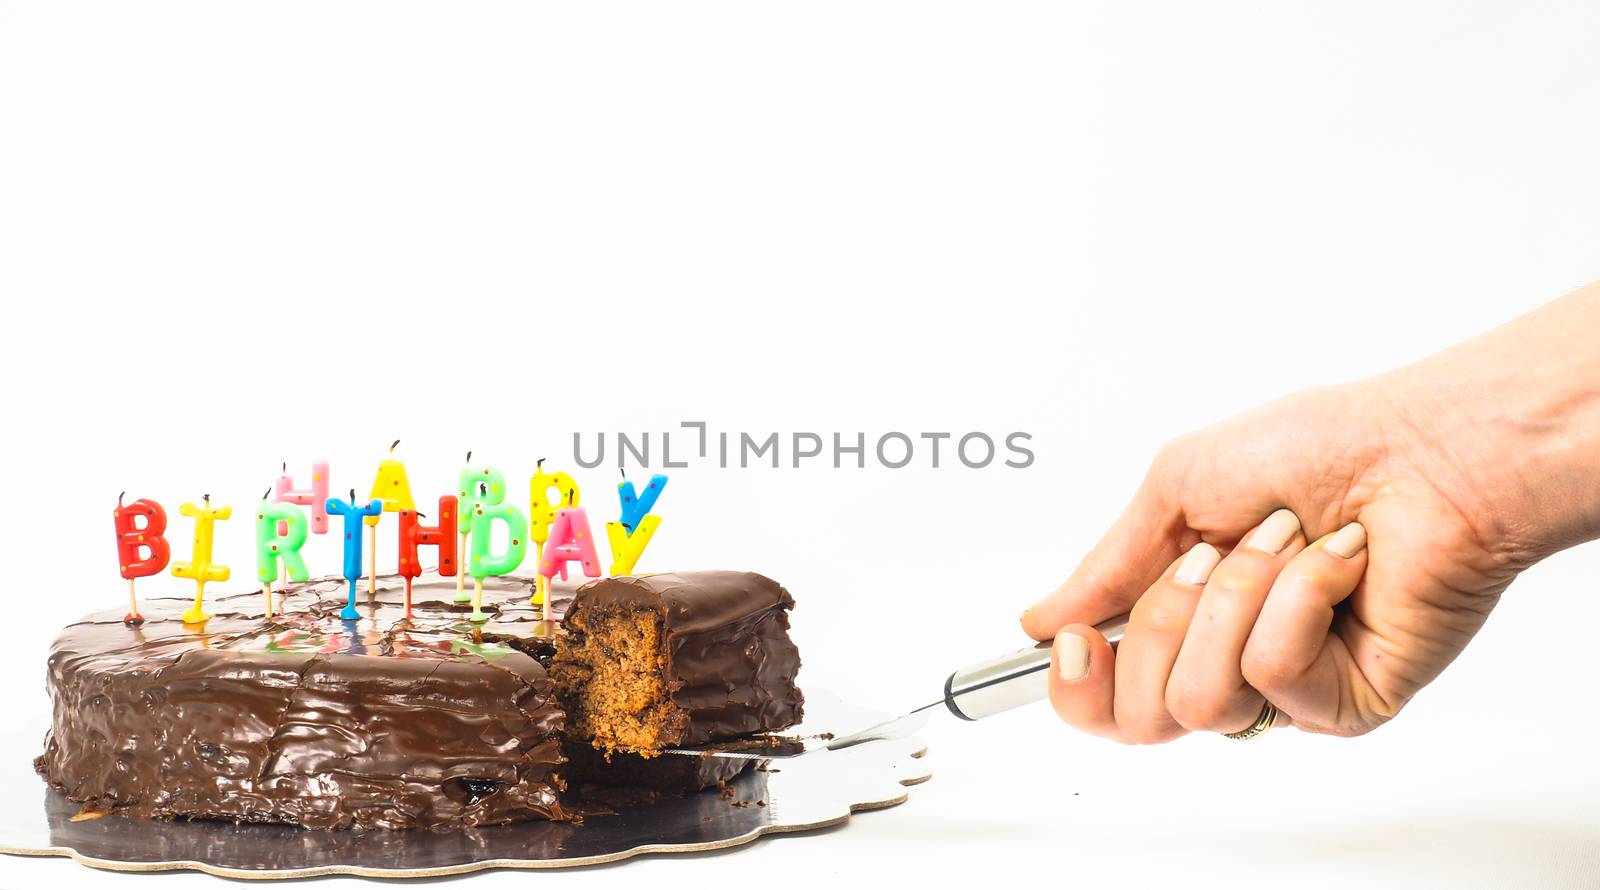 Female person serving a homemade sacher chocolate cake with birt by Arvebettum